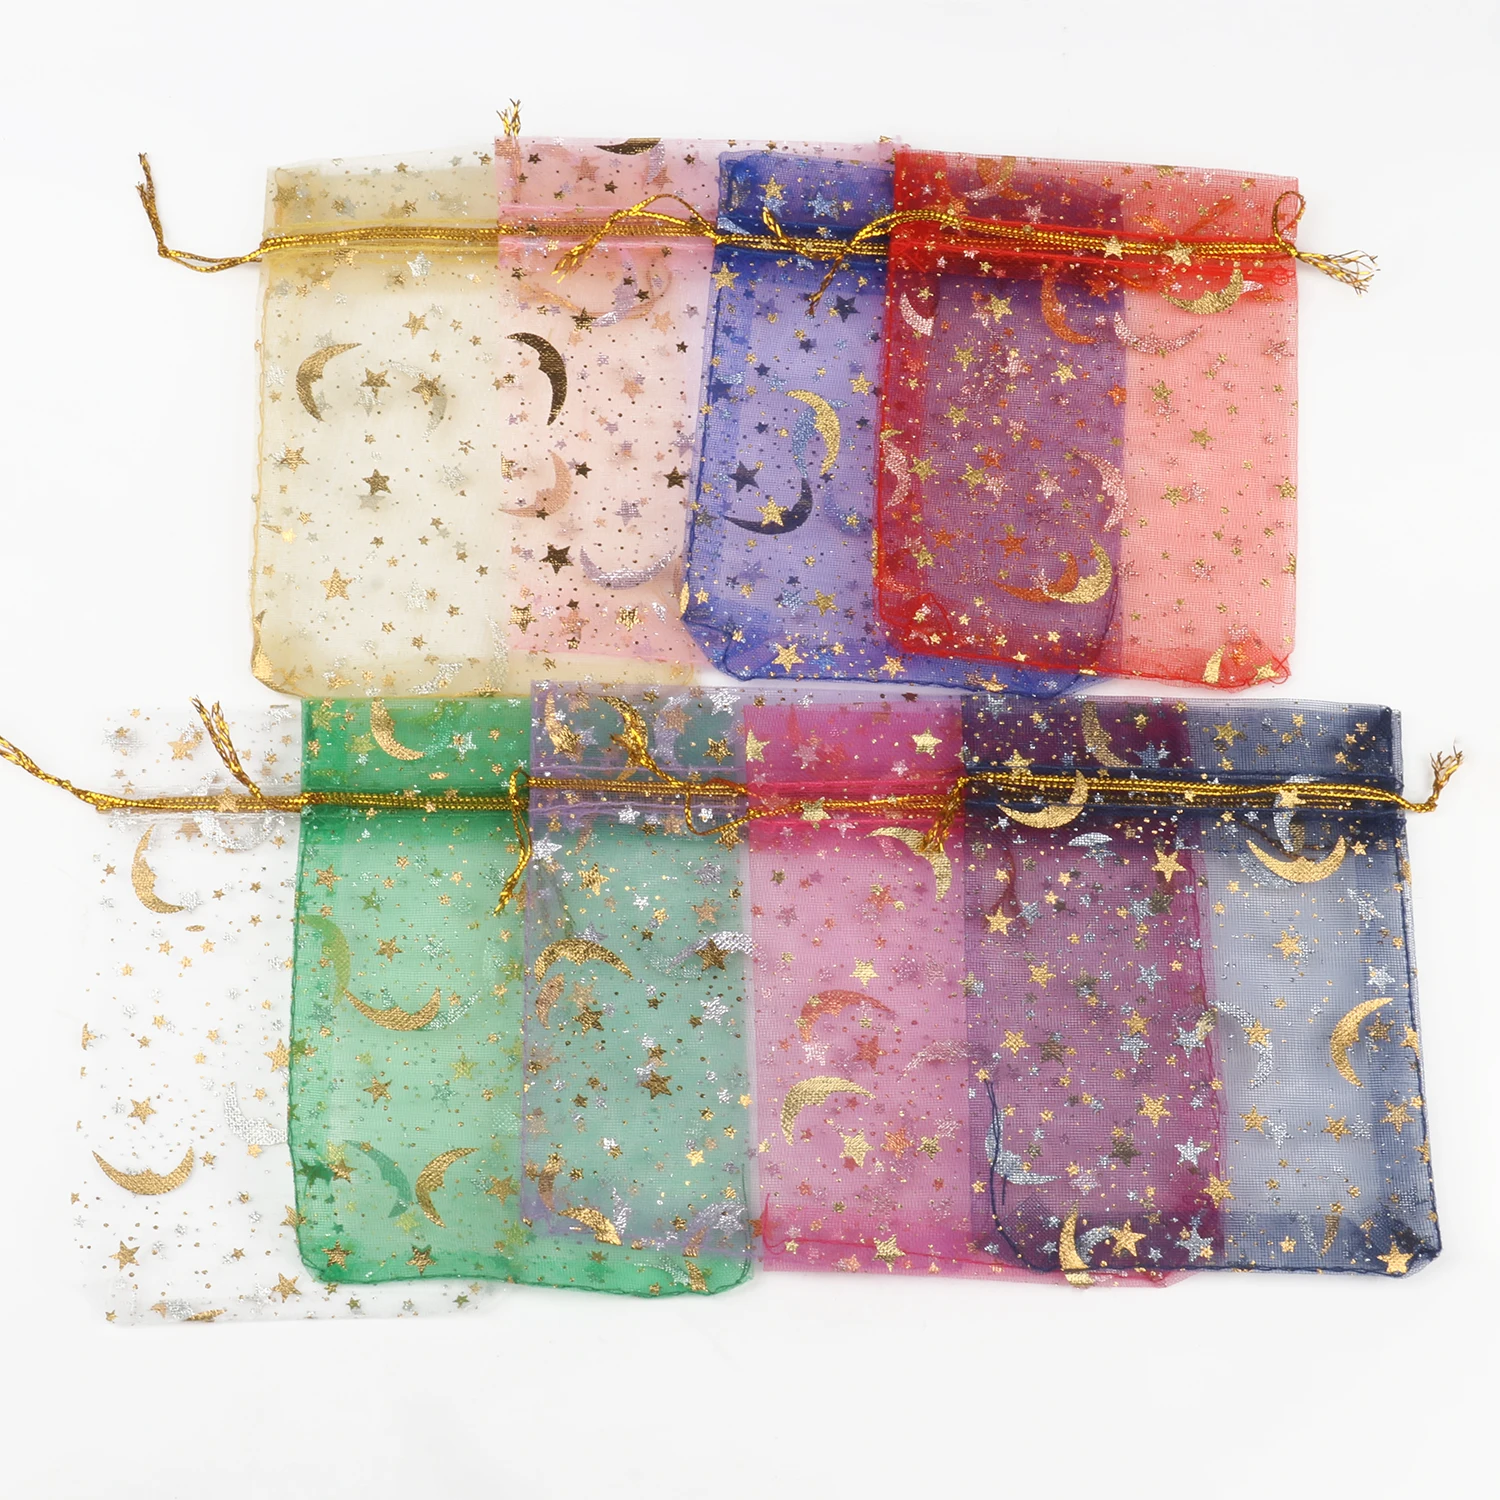 50pcs 9x12cm 11x16cm 13x18cm 17x23cm Mixed Gold Moon Star Adjustable  Drawstring Pouch Bags for Wedding Gifts Organza Jewelry - AliExpress